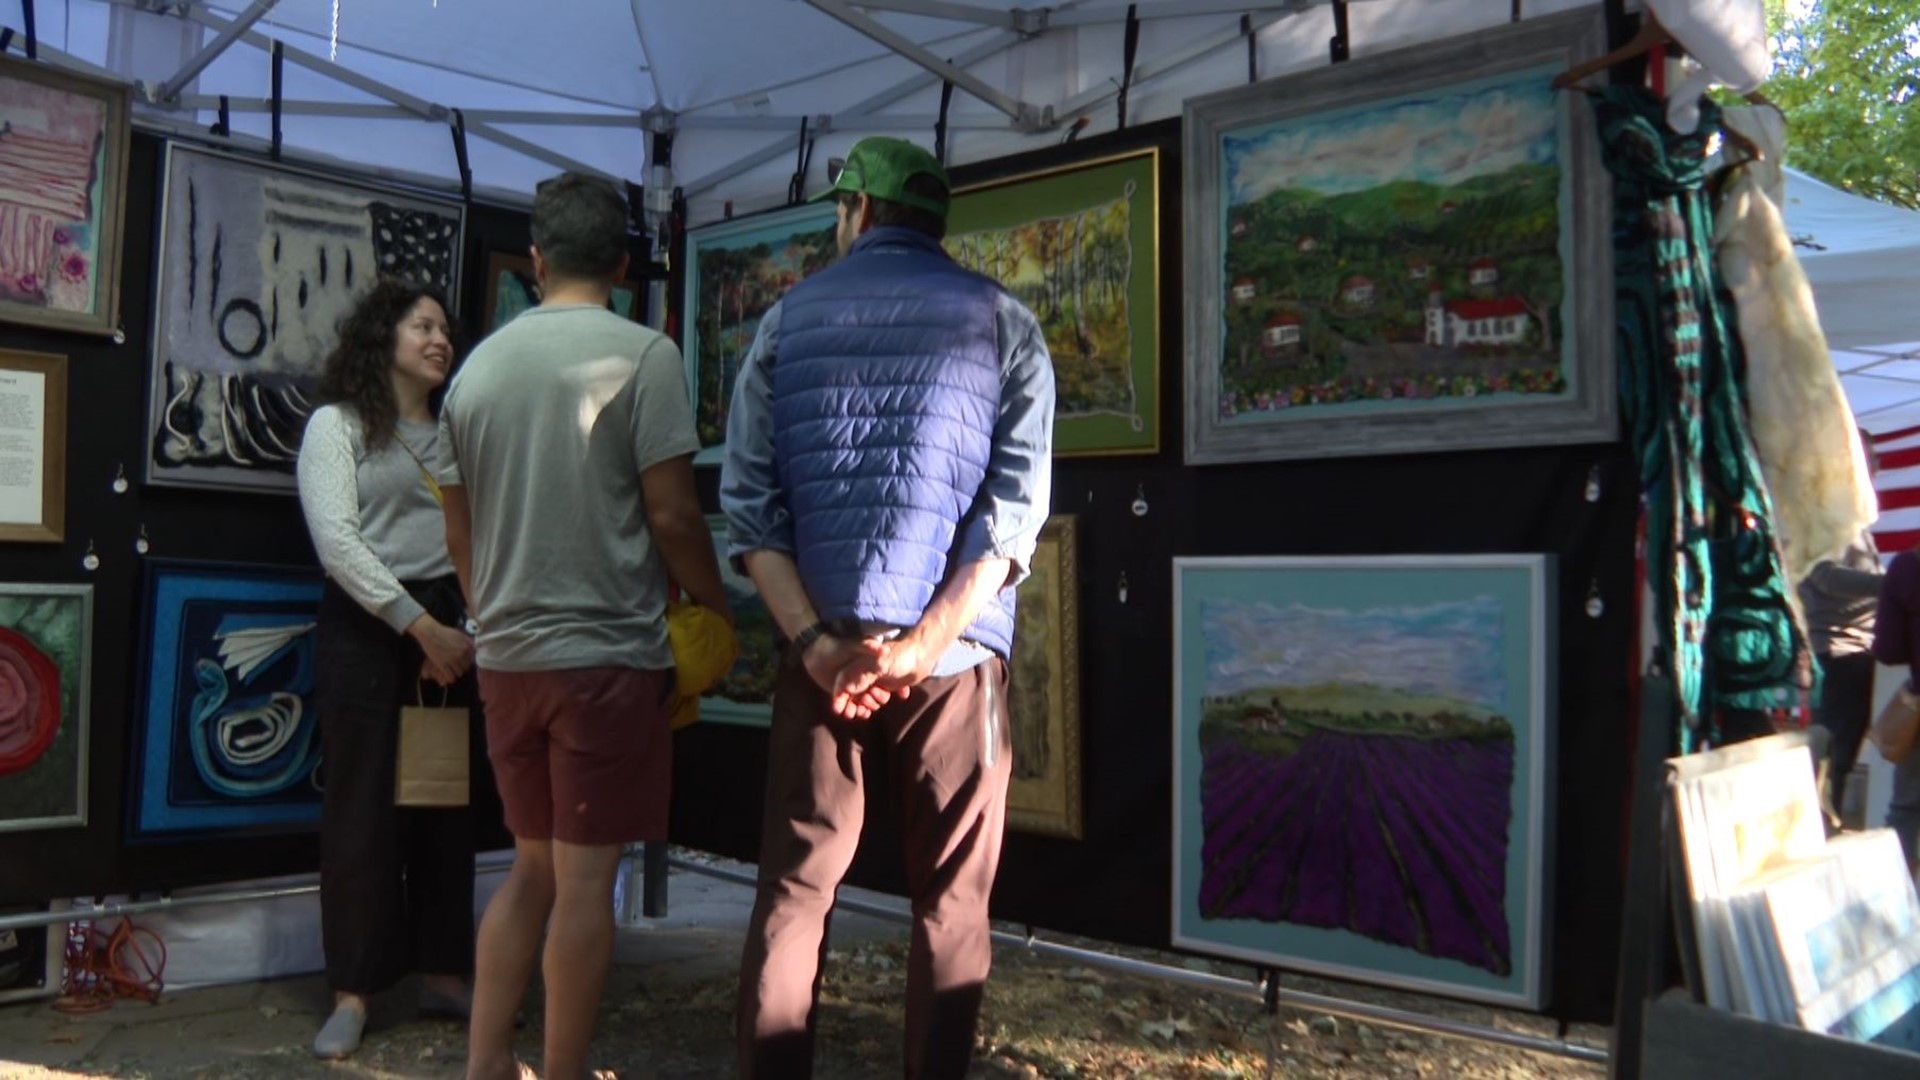 The 3-day art festival in Old Louisville had a stretch of beautiful weather and is expected to bring in nearly $5 million to the city's economy.